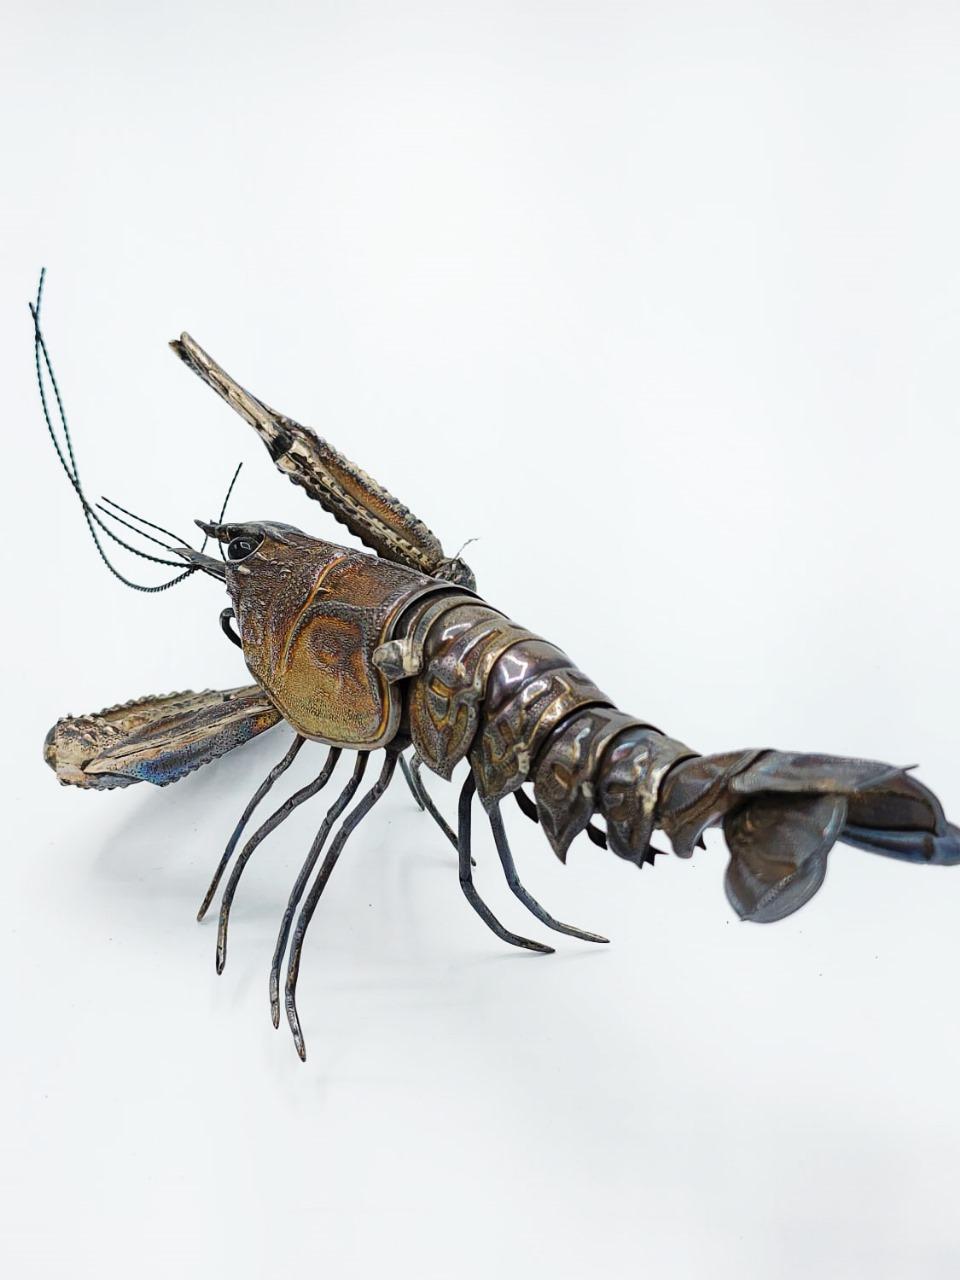 Articulated Spanish silver lobster.
This Art is called jizai okimono (which can be translated as decorative object that moves) are realistic figures of animals made of steel, copper, Shibuchi (a silver and copper alloy) and shakudo (copper and gold